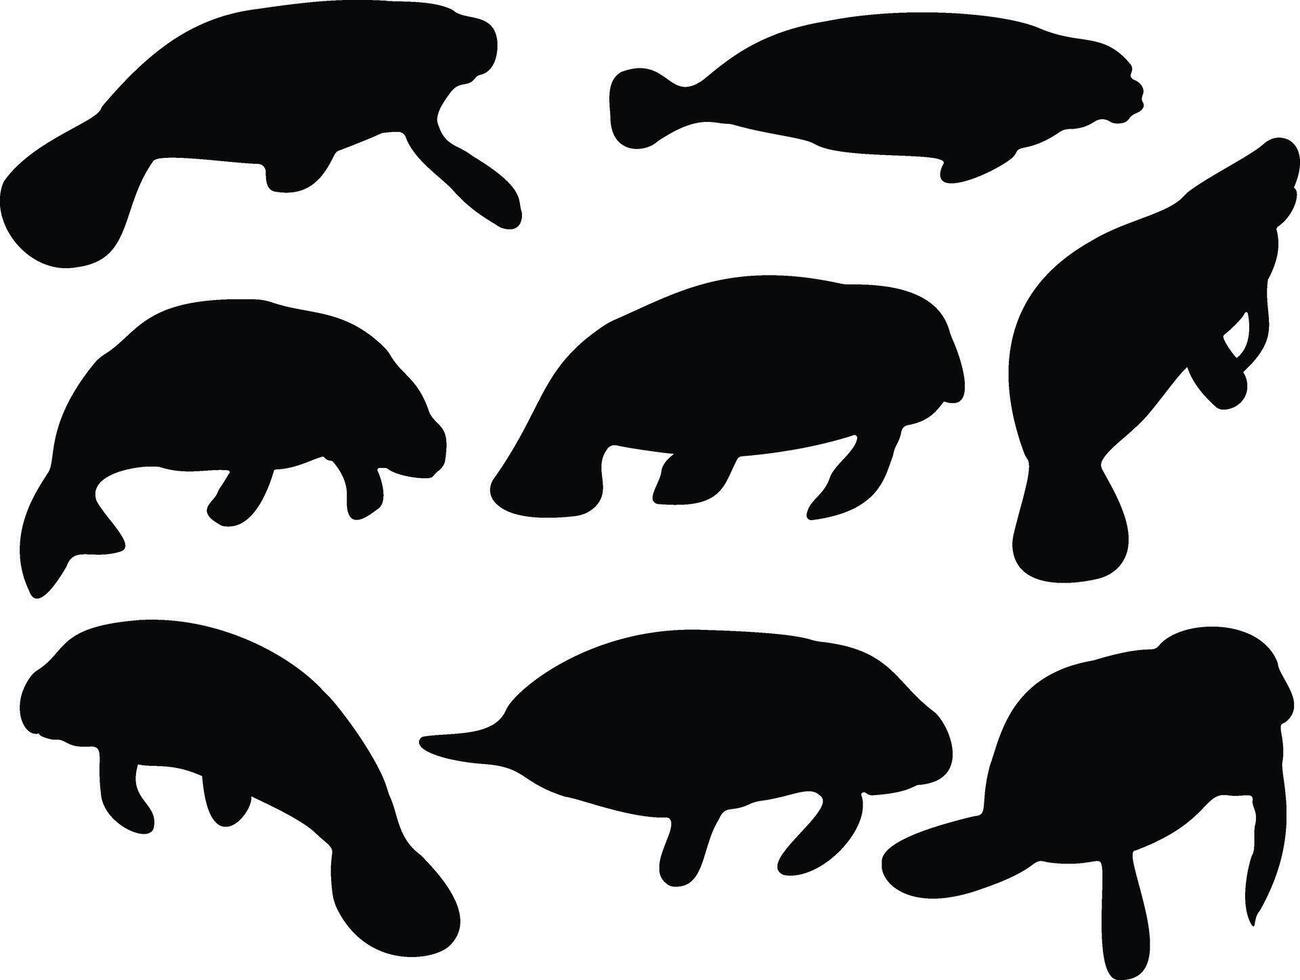 Manatee silhouette on white background vector